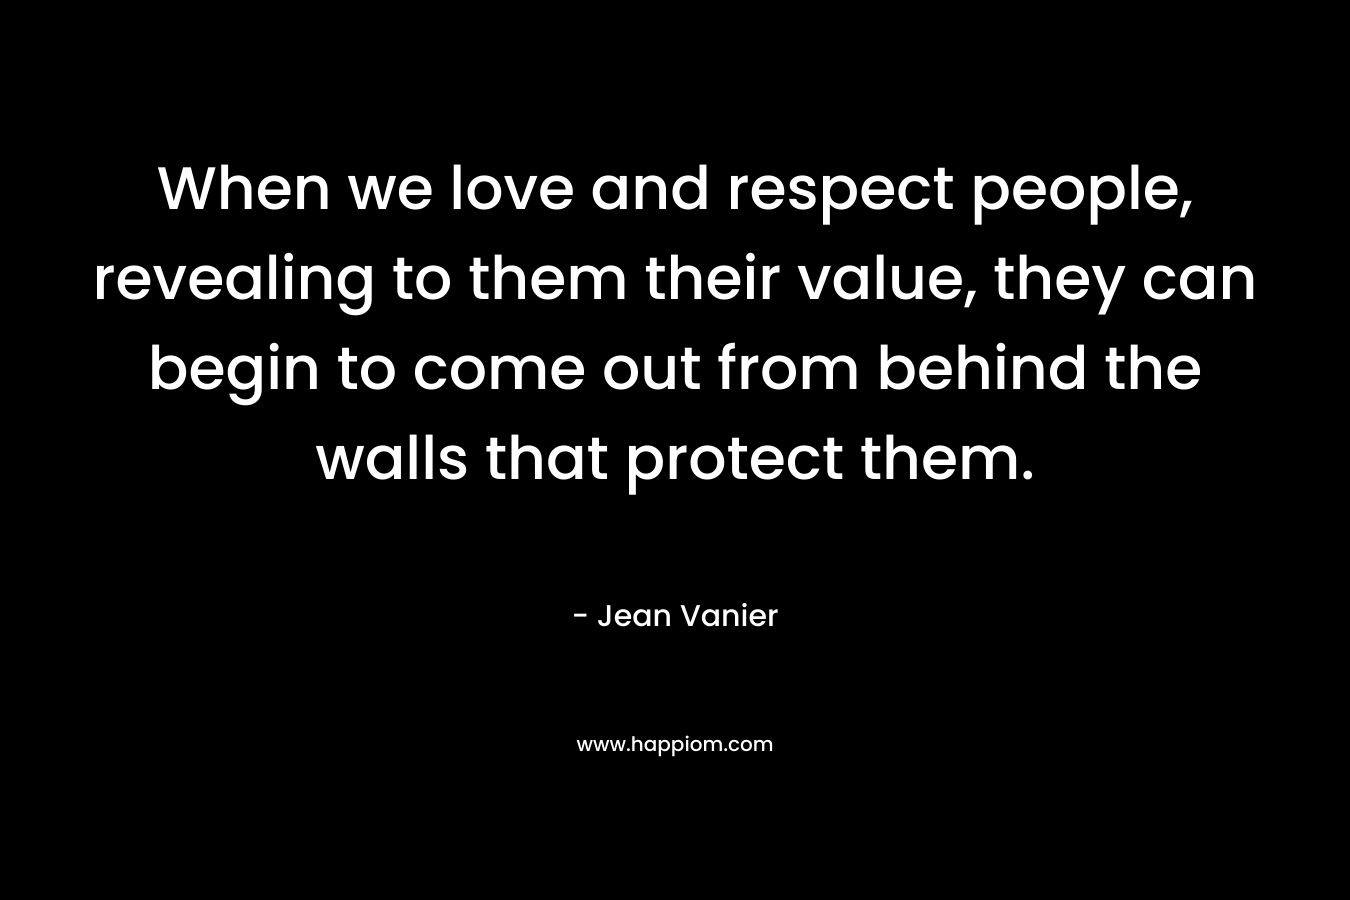 When we love and respect people, revealing to them their value, they can begin to come out from behind the walls that protect them.